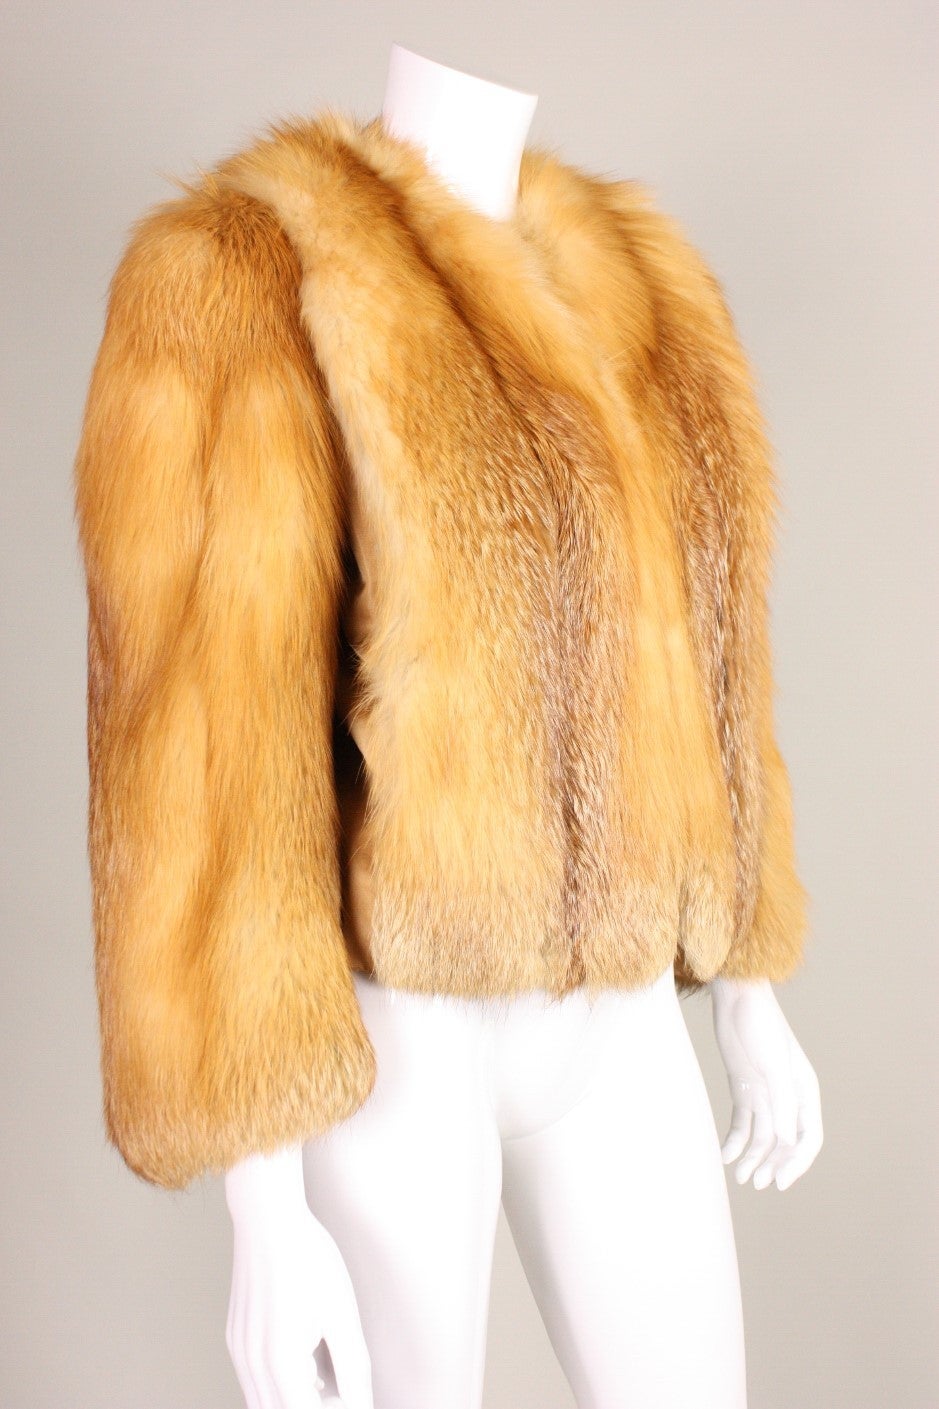 Vintage fur jacket dates to the 1970's through 1980's and is made of caramel-colored fox fur.  Turn down collar.  Long sleeves can be made more or less flared at the cuff with covered snap closure.  Center front double hook closure.  Fully lined. 